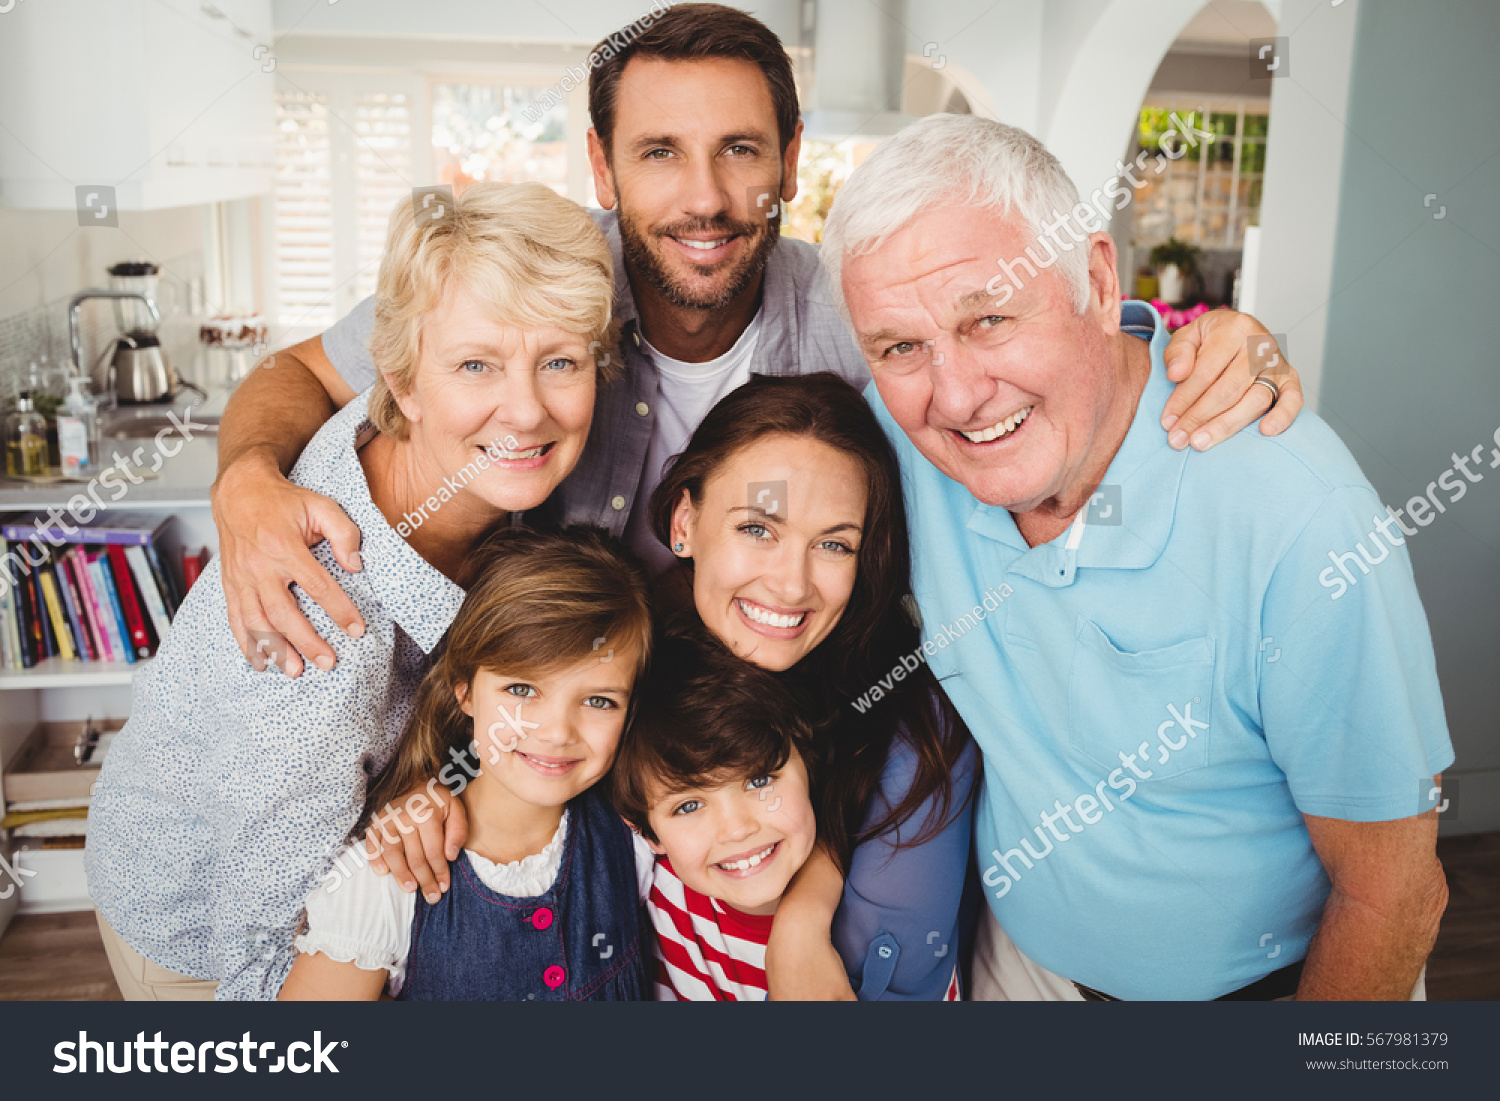 Portrait of smiling family with grandparents at home #567981379